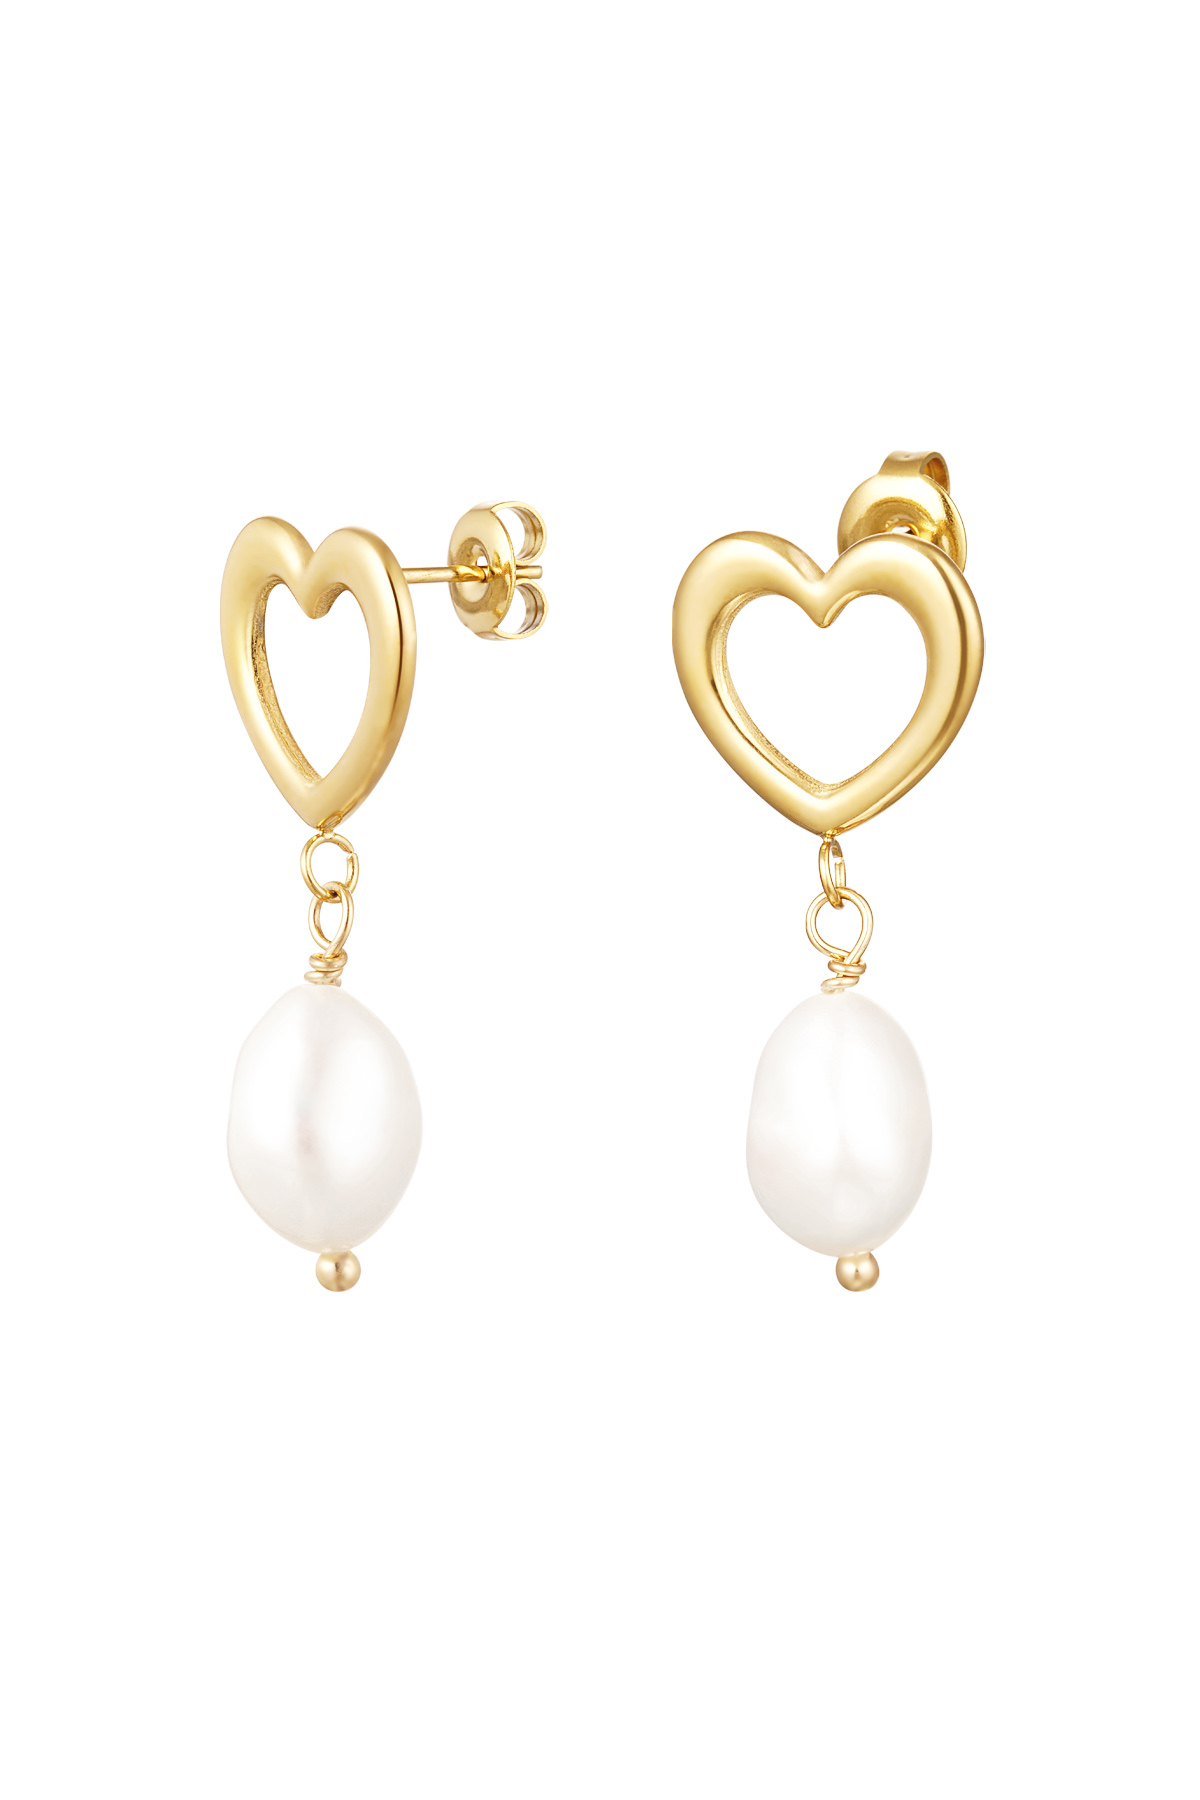 Earring heart with pearl detail - gold stainless steel h5 